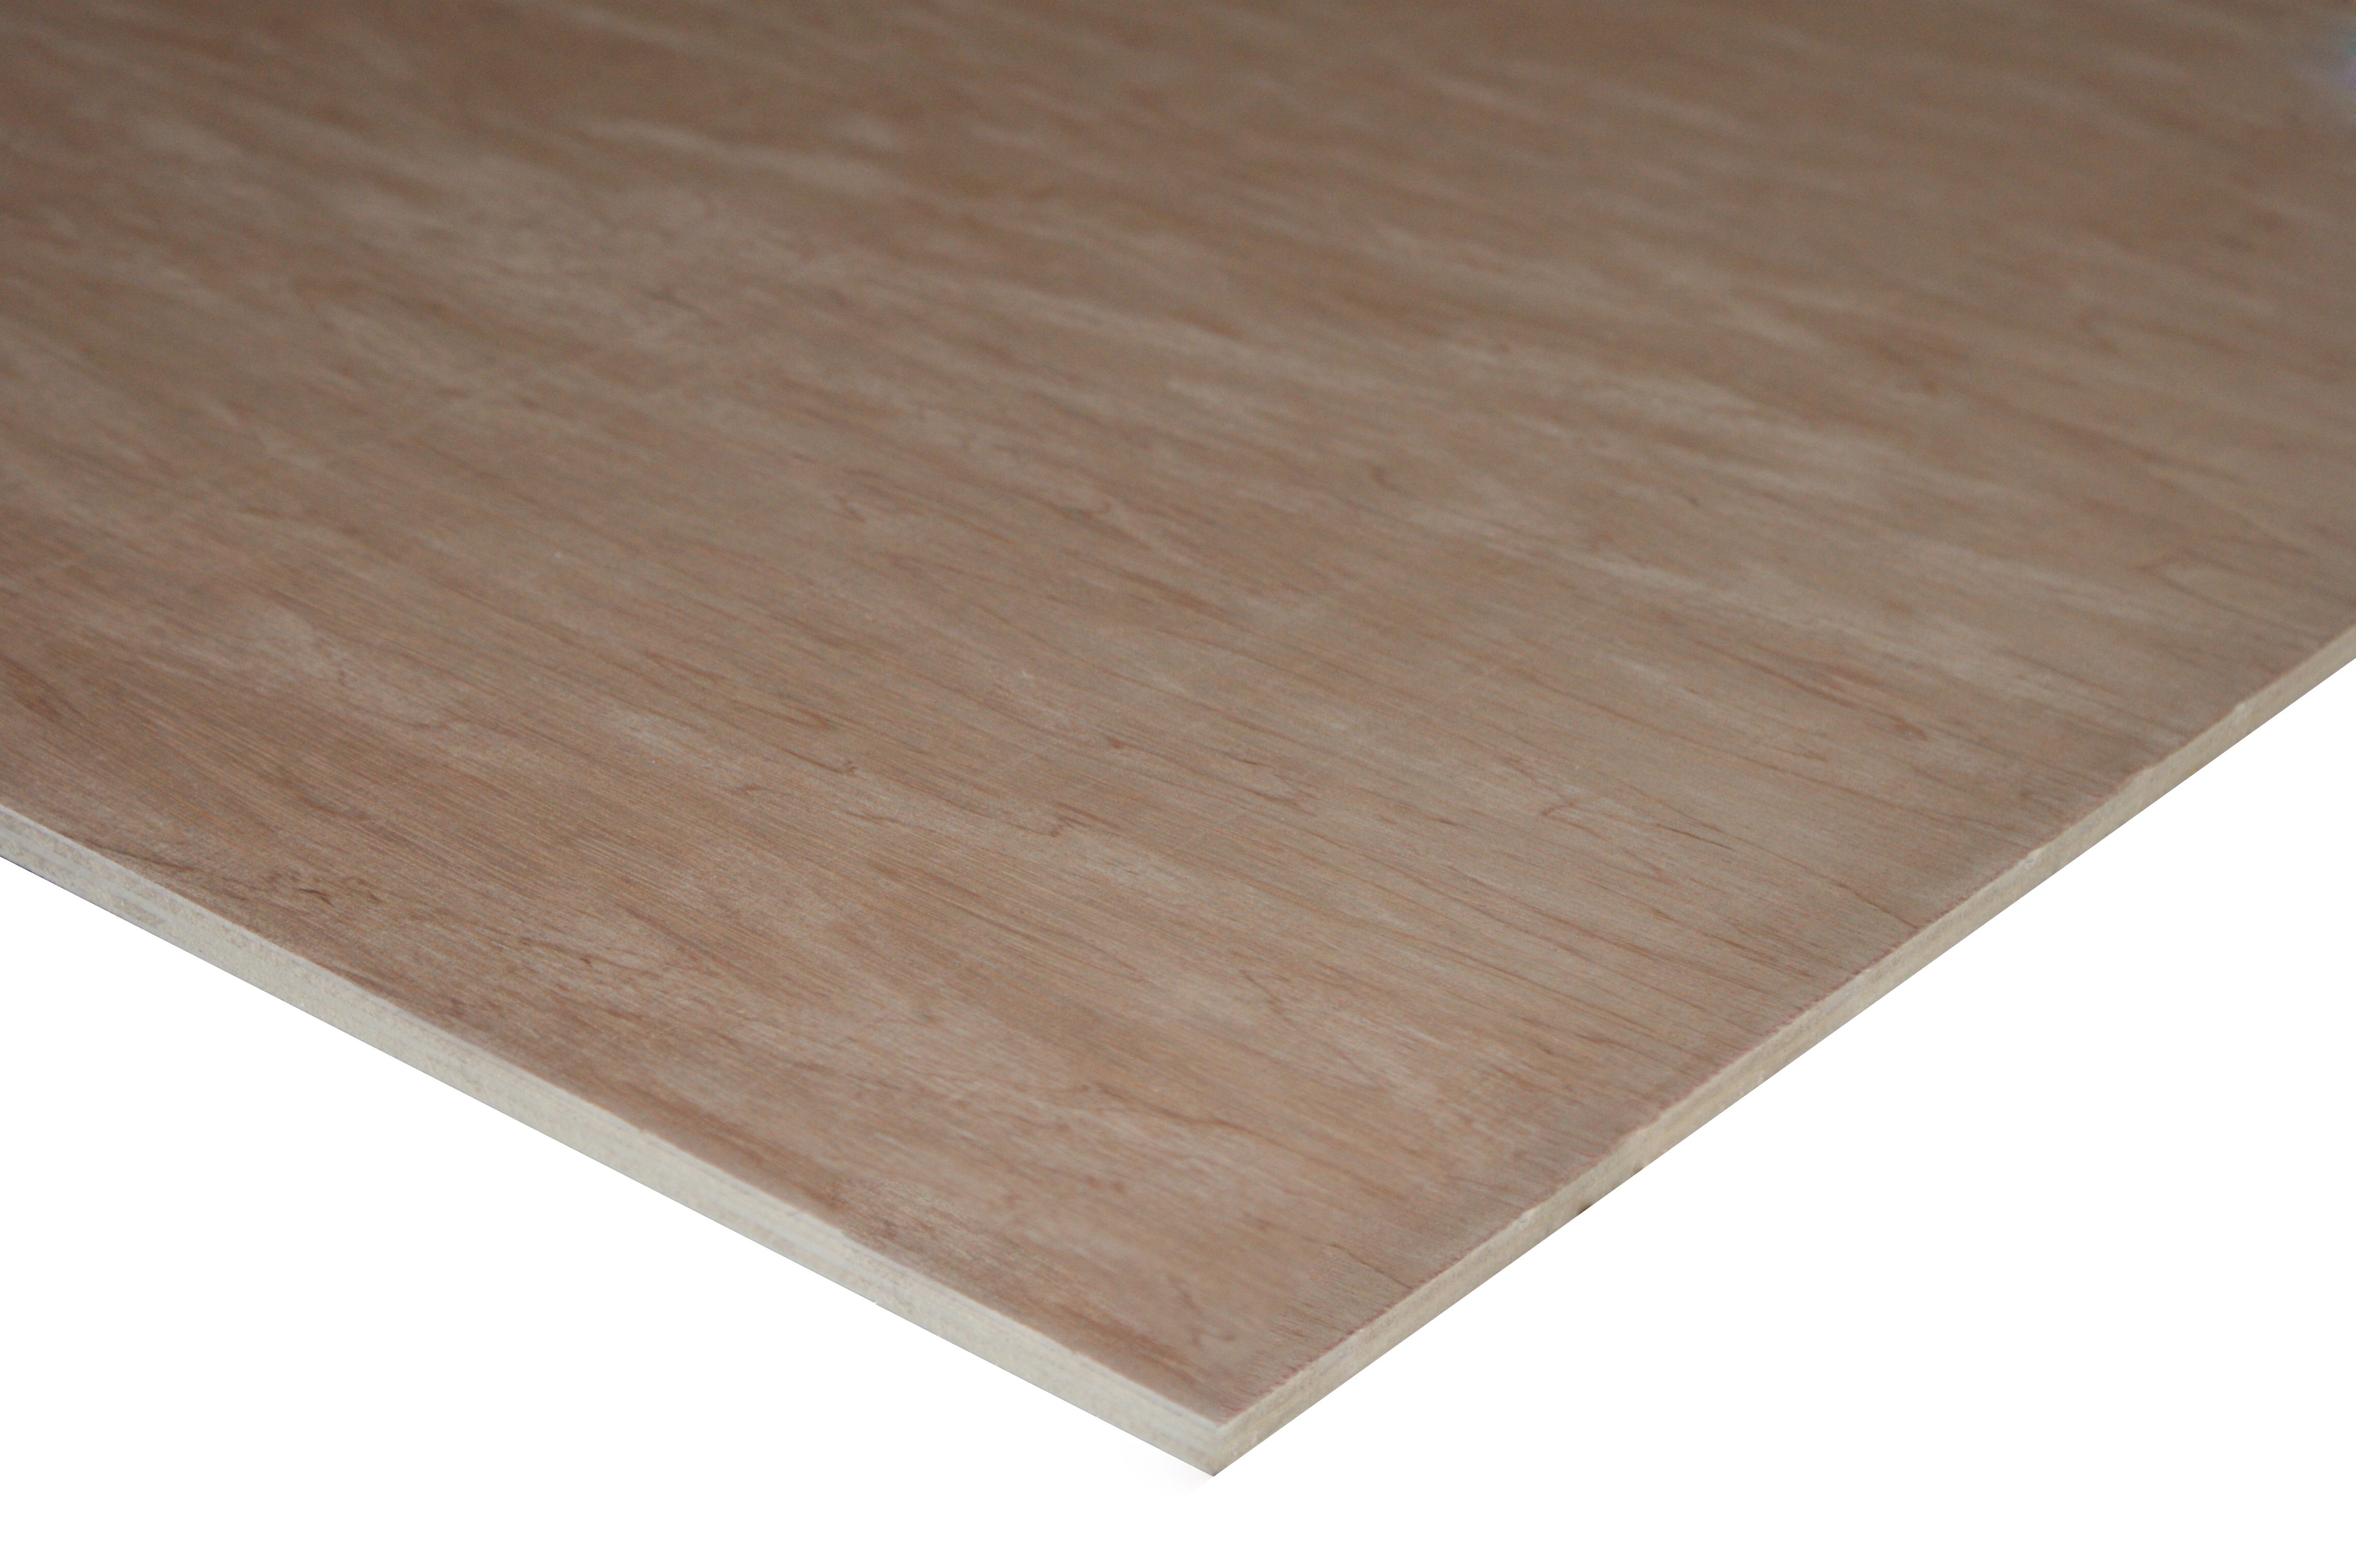 Image of Wickes Non-Structural Hardwood Plywood - 9 x 1220 x 2440mm